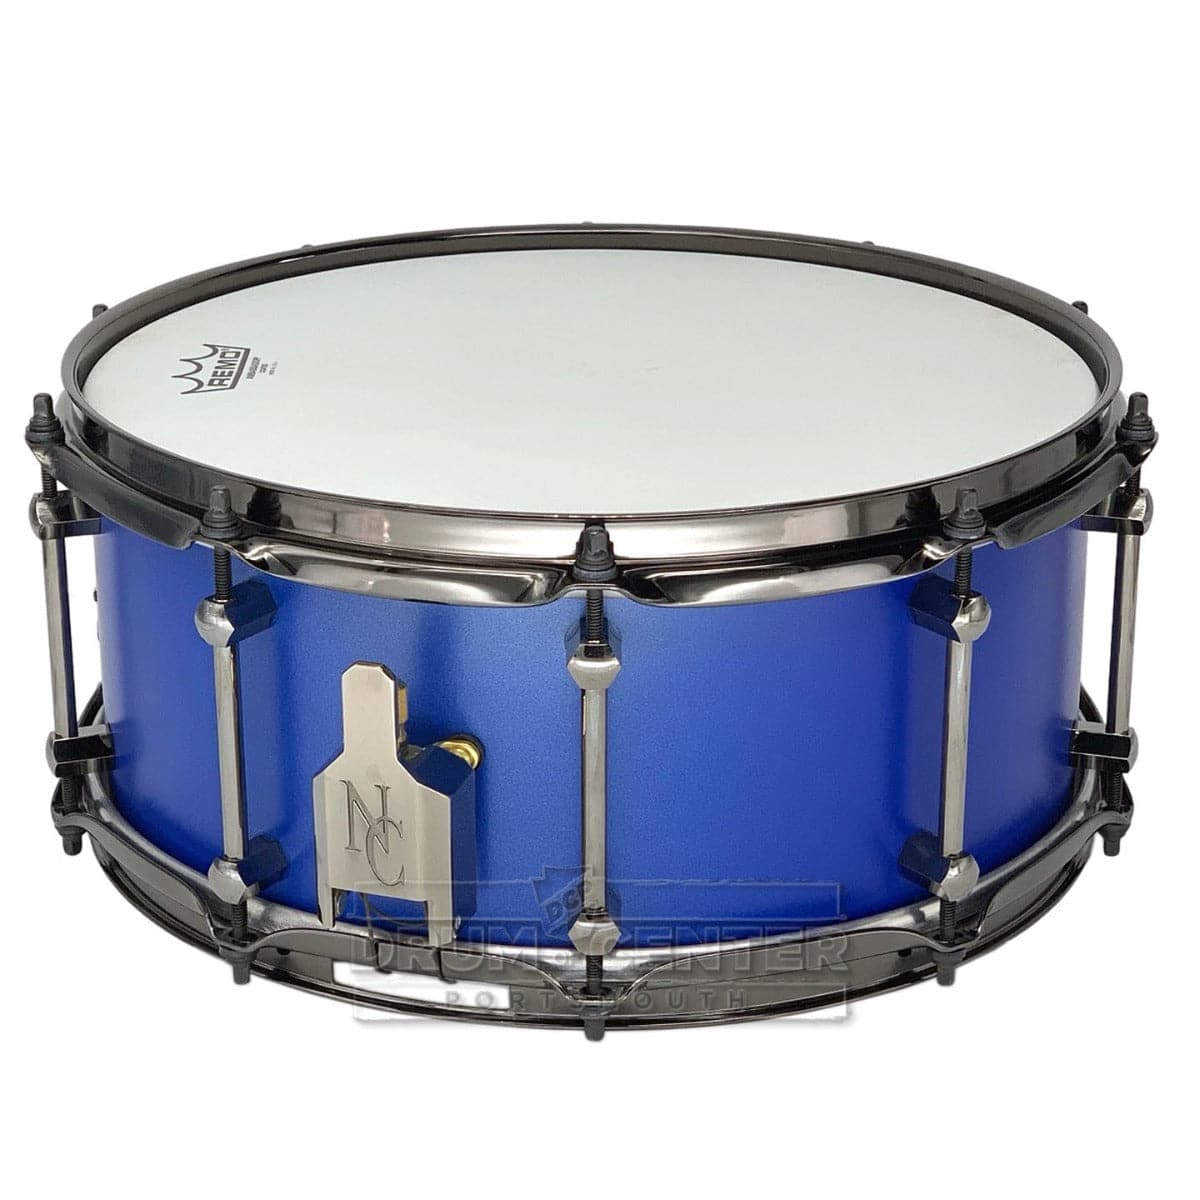 Noble & Cooley Alloy Classic Painted Snare Drum 14x6 Flat Royal Blue w/Black Hw